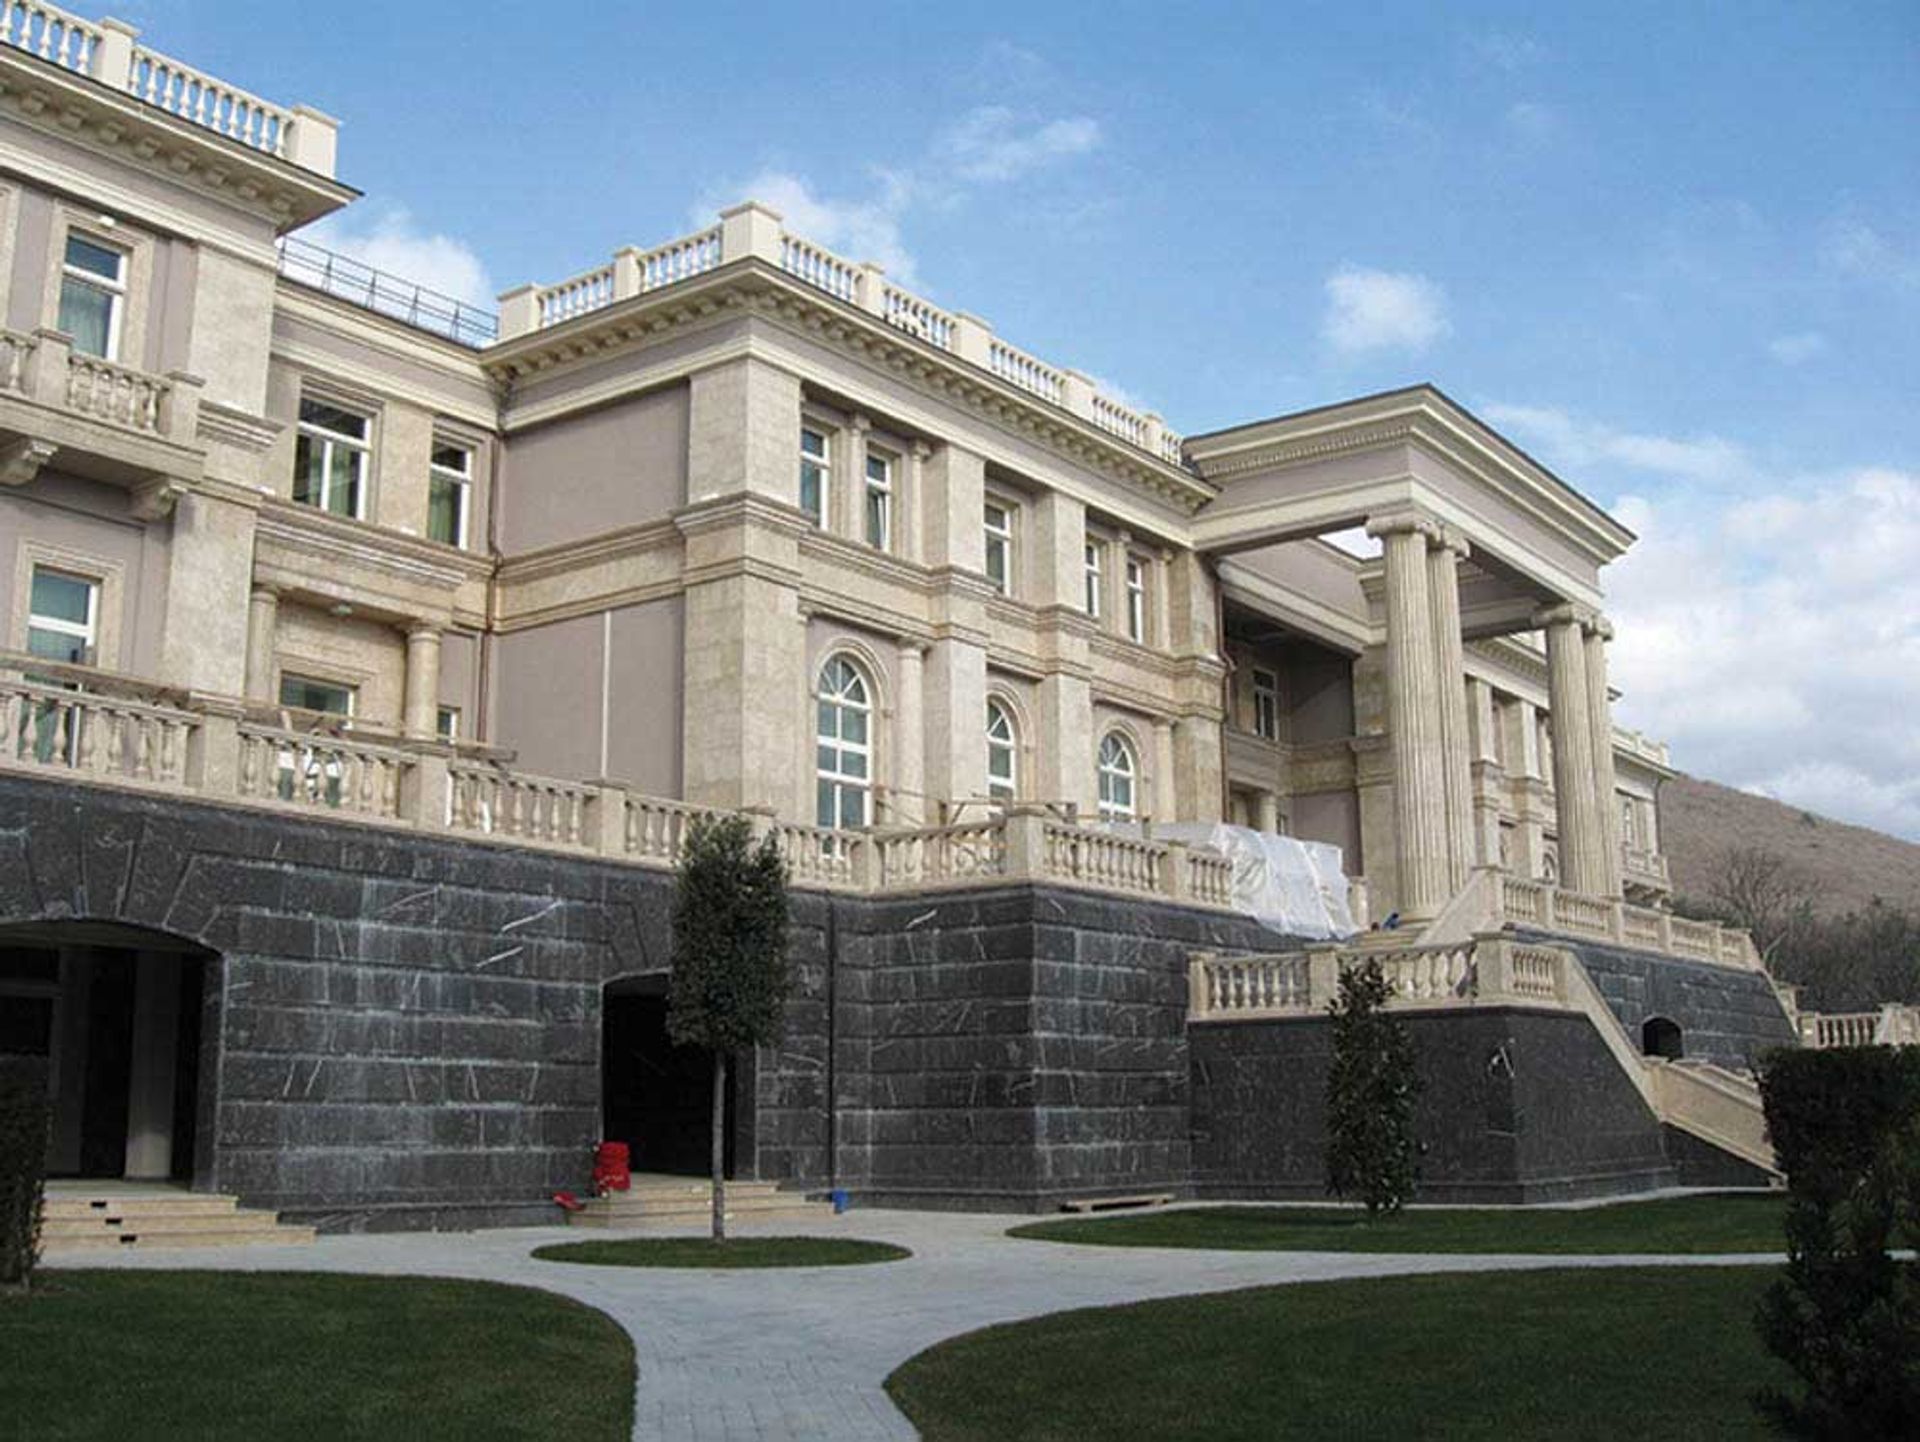 The Cirillo-designed Black Sea mansion, believed to have been built for Vladimir Putin, features a theatre, casino and underground ice-hockey rink

Photo: Dmitry Shevchenko



